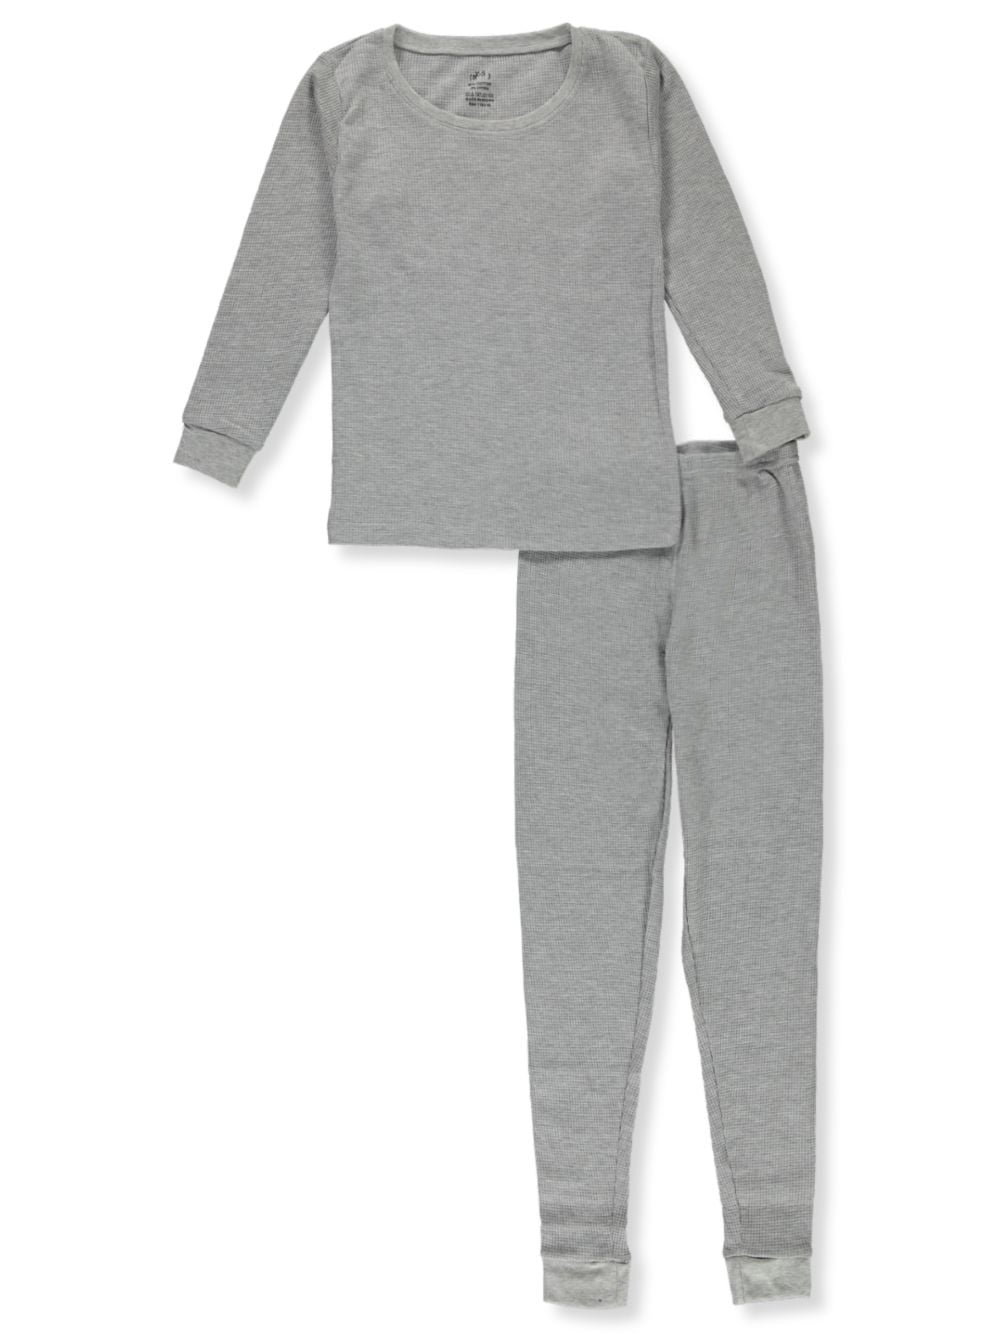 Lightweight Fleece Lined Base Layer Only Boys Warm and Cozy Thermal Underwear Set 